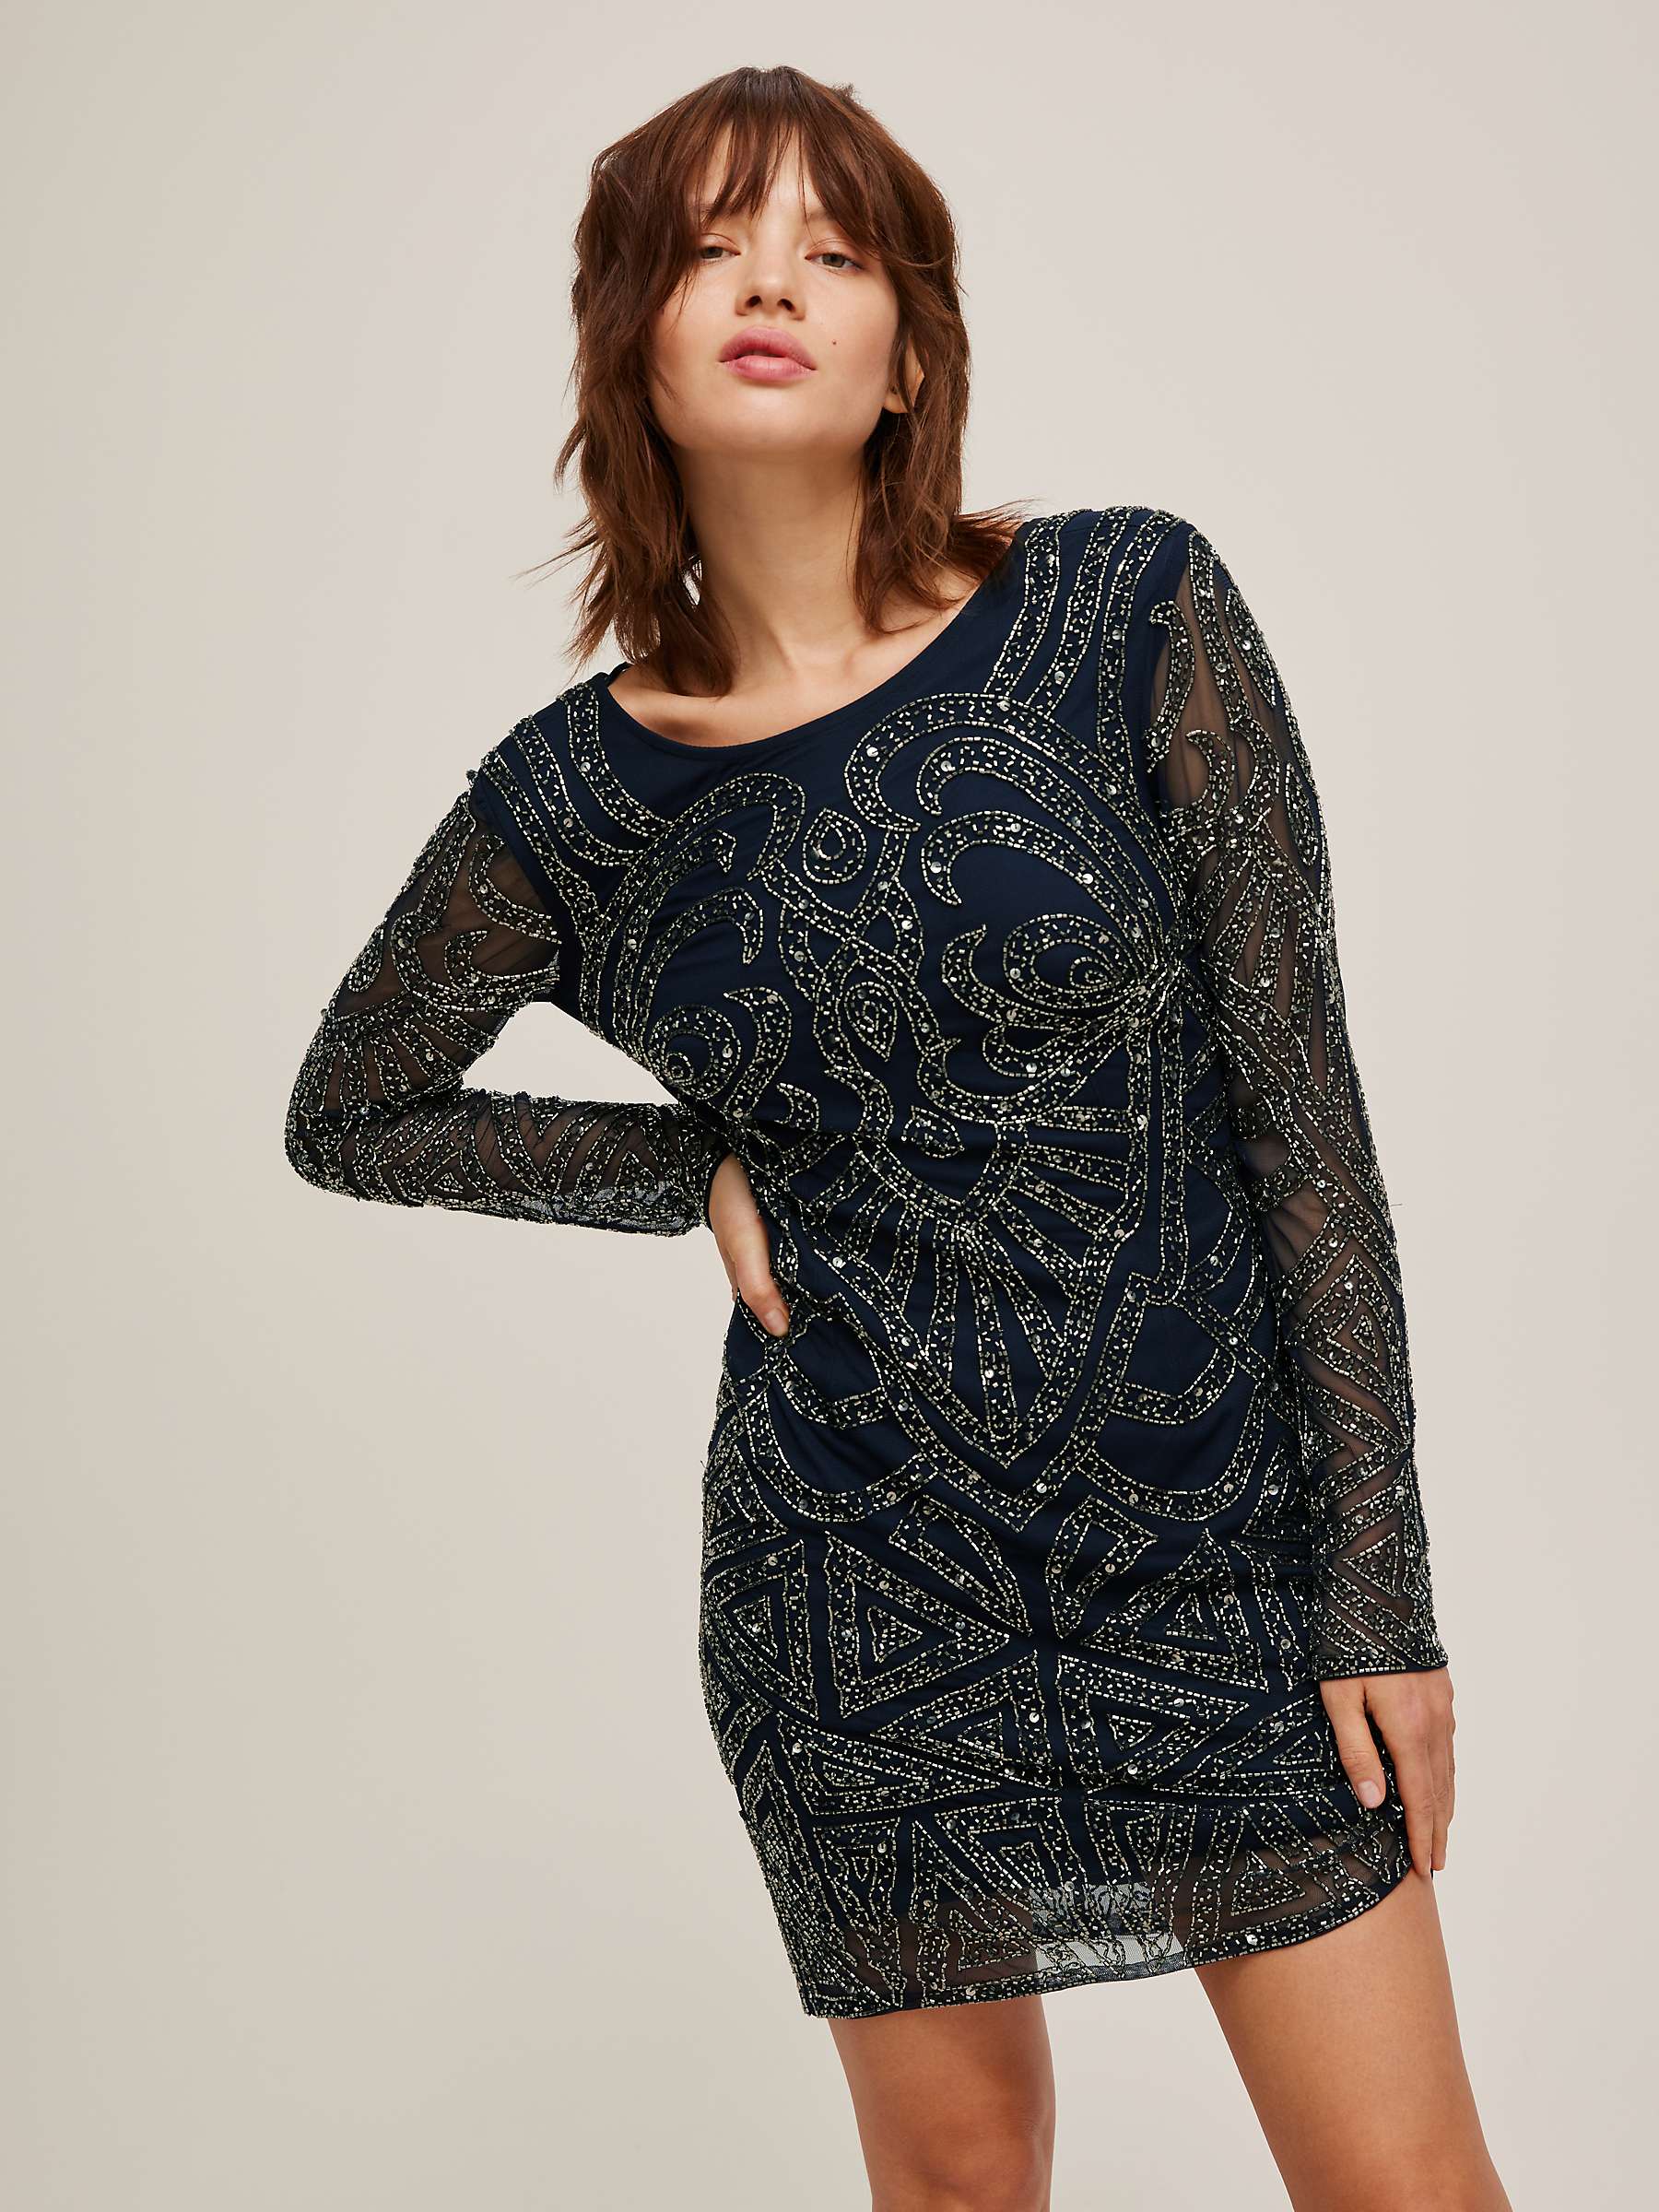 Buy Lace & Beads Brooklyn Embellished Mini Dress Online at johnlewis.com